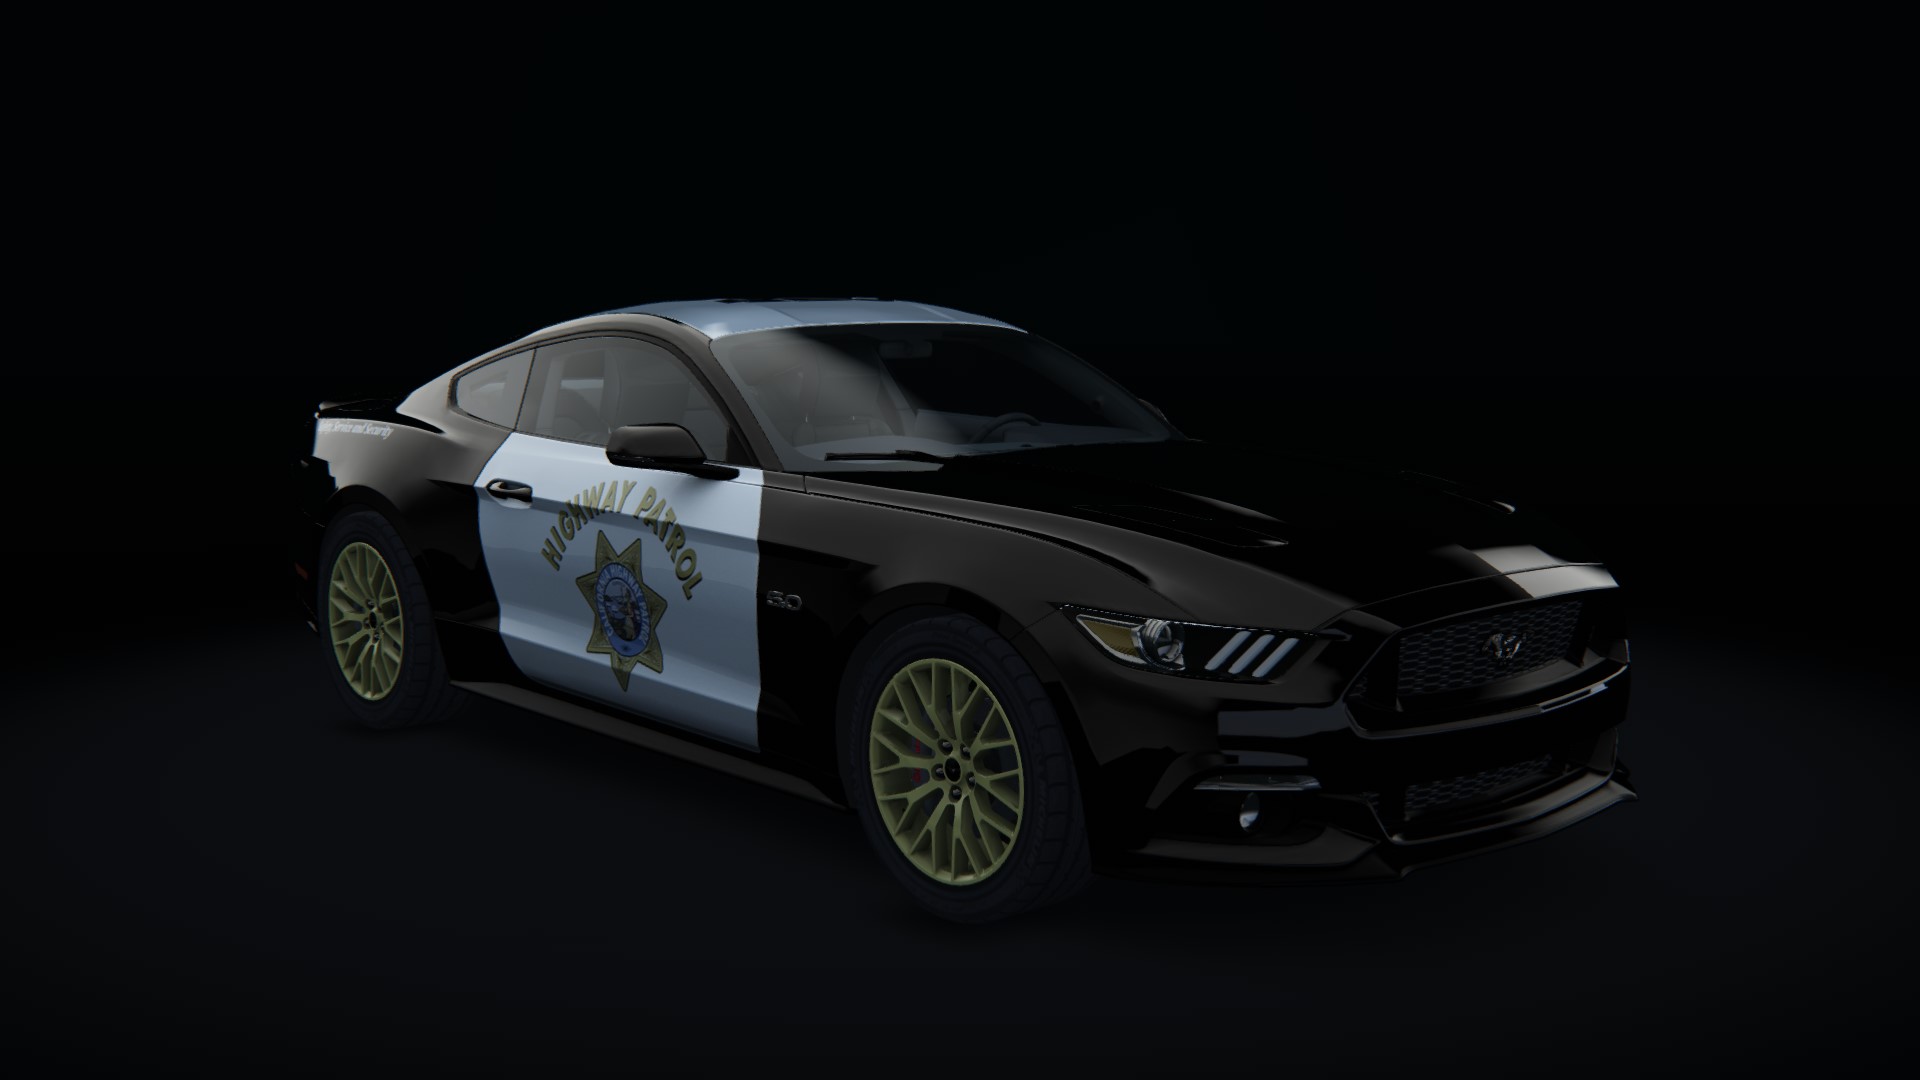 Ford Mustang 2015, skin chp_unit_275